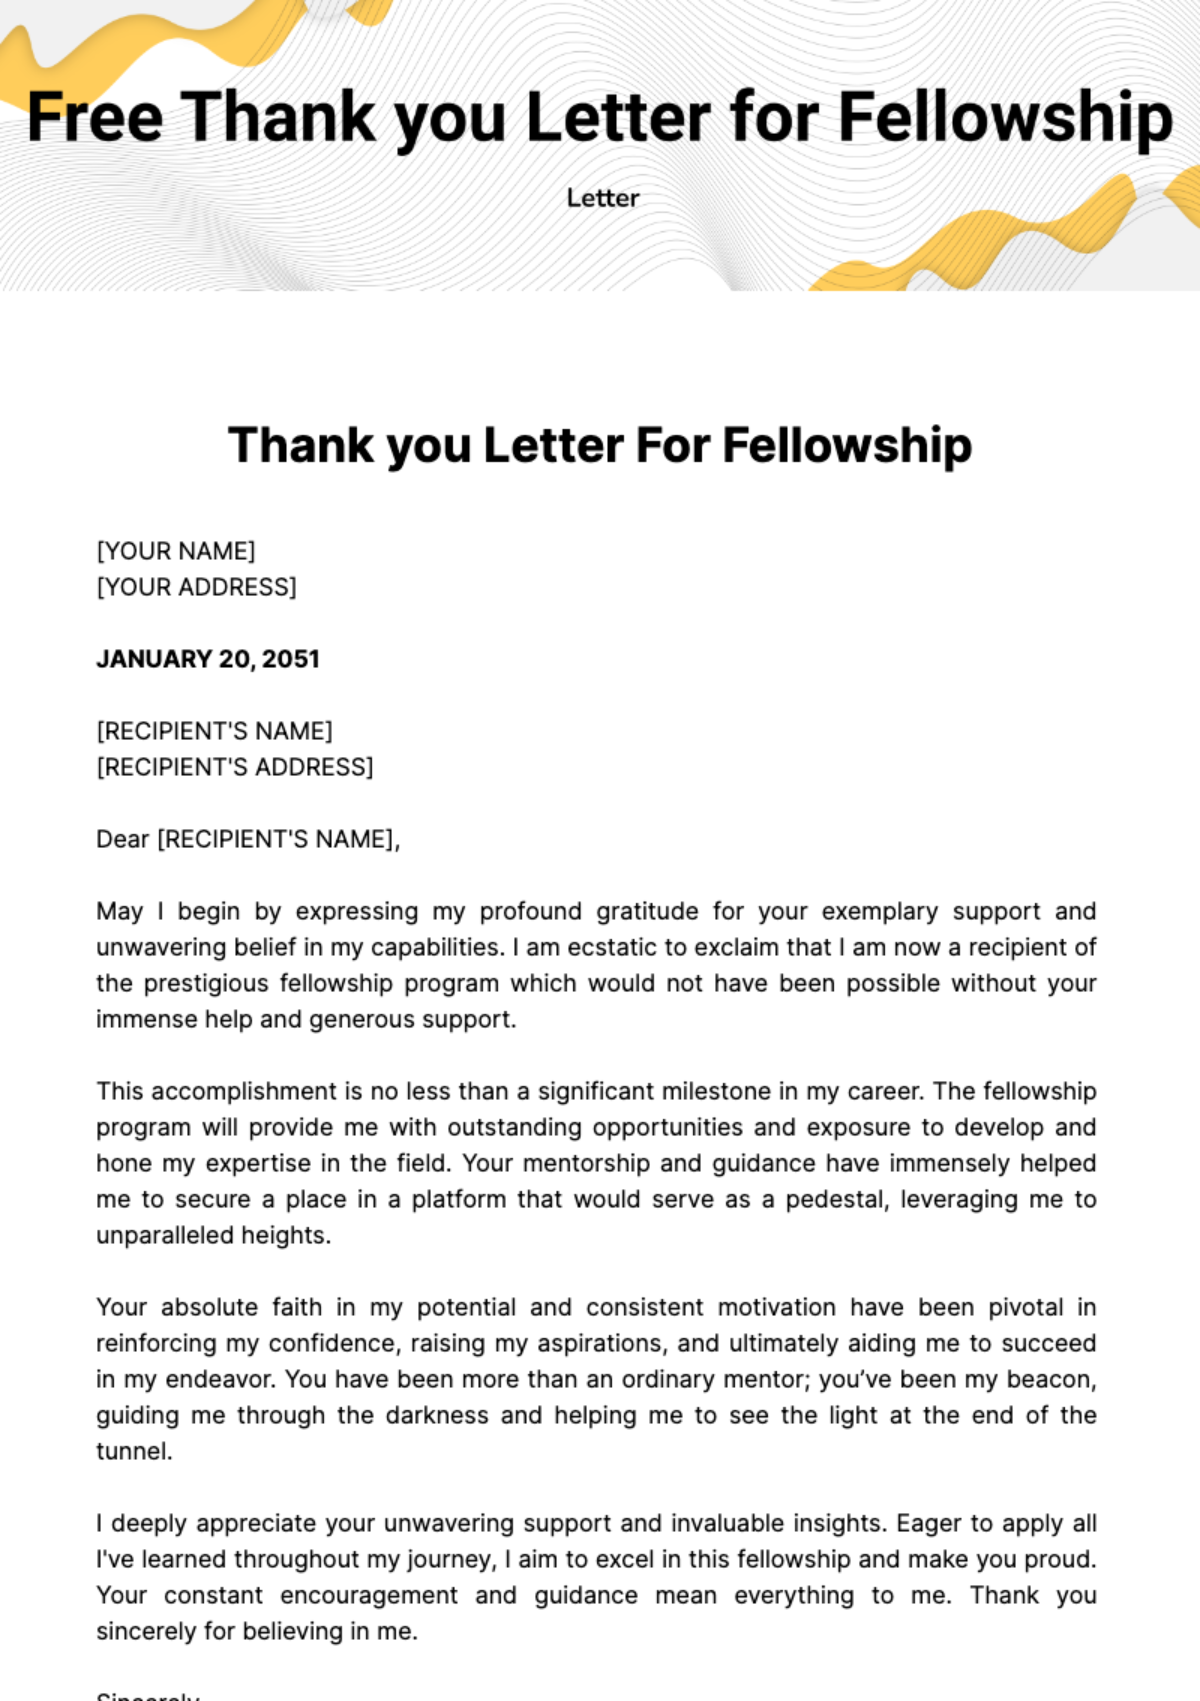 Thank you Letter for Fellowship Template